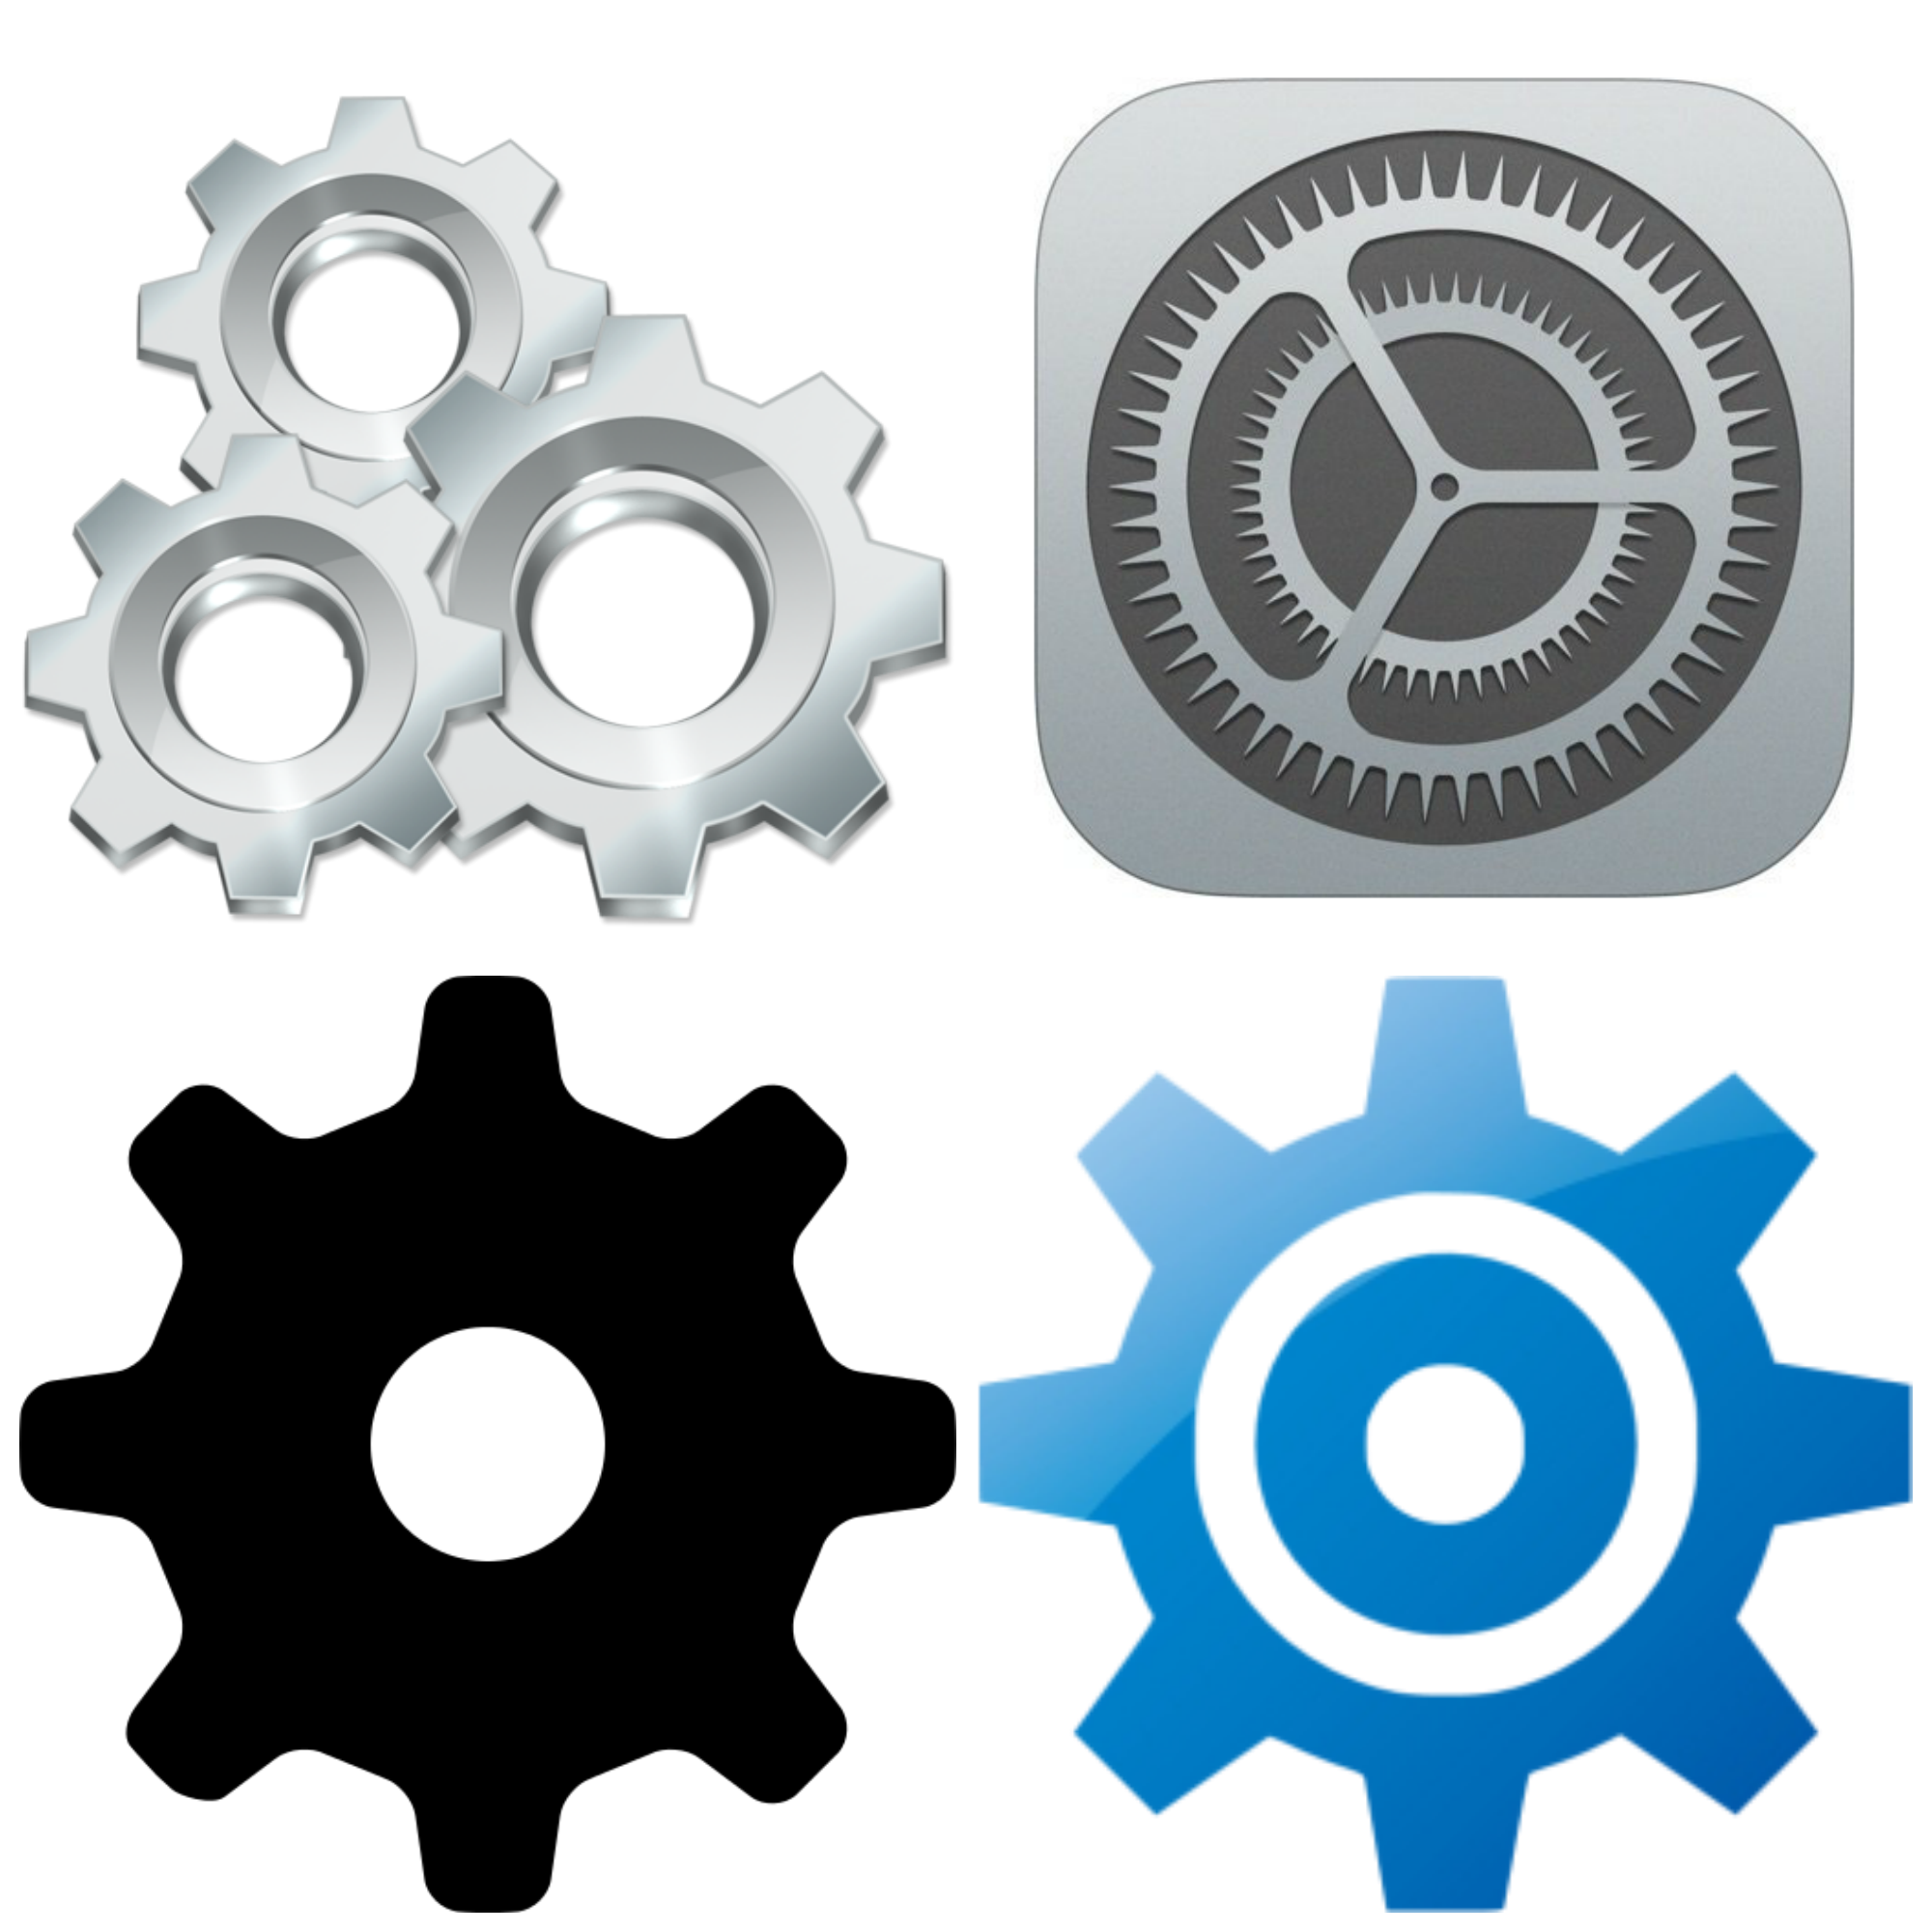 Two gears icon settings isolated ~ Icons ~ Creative Market